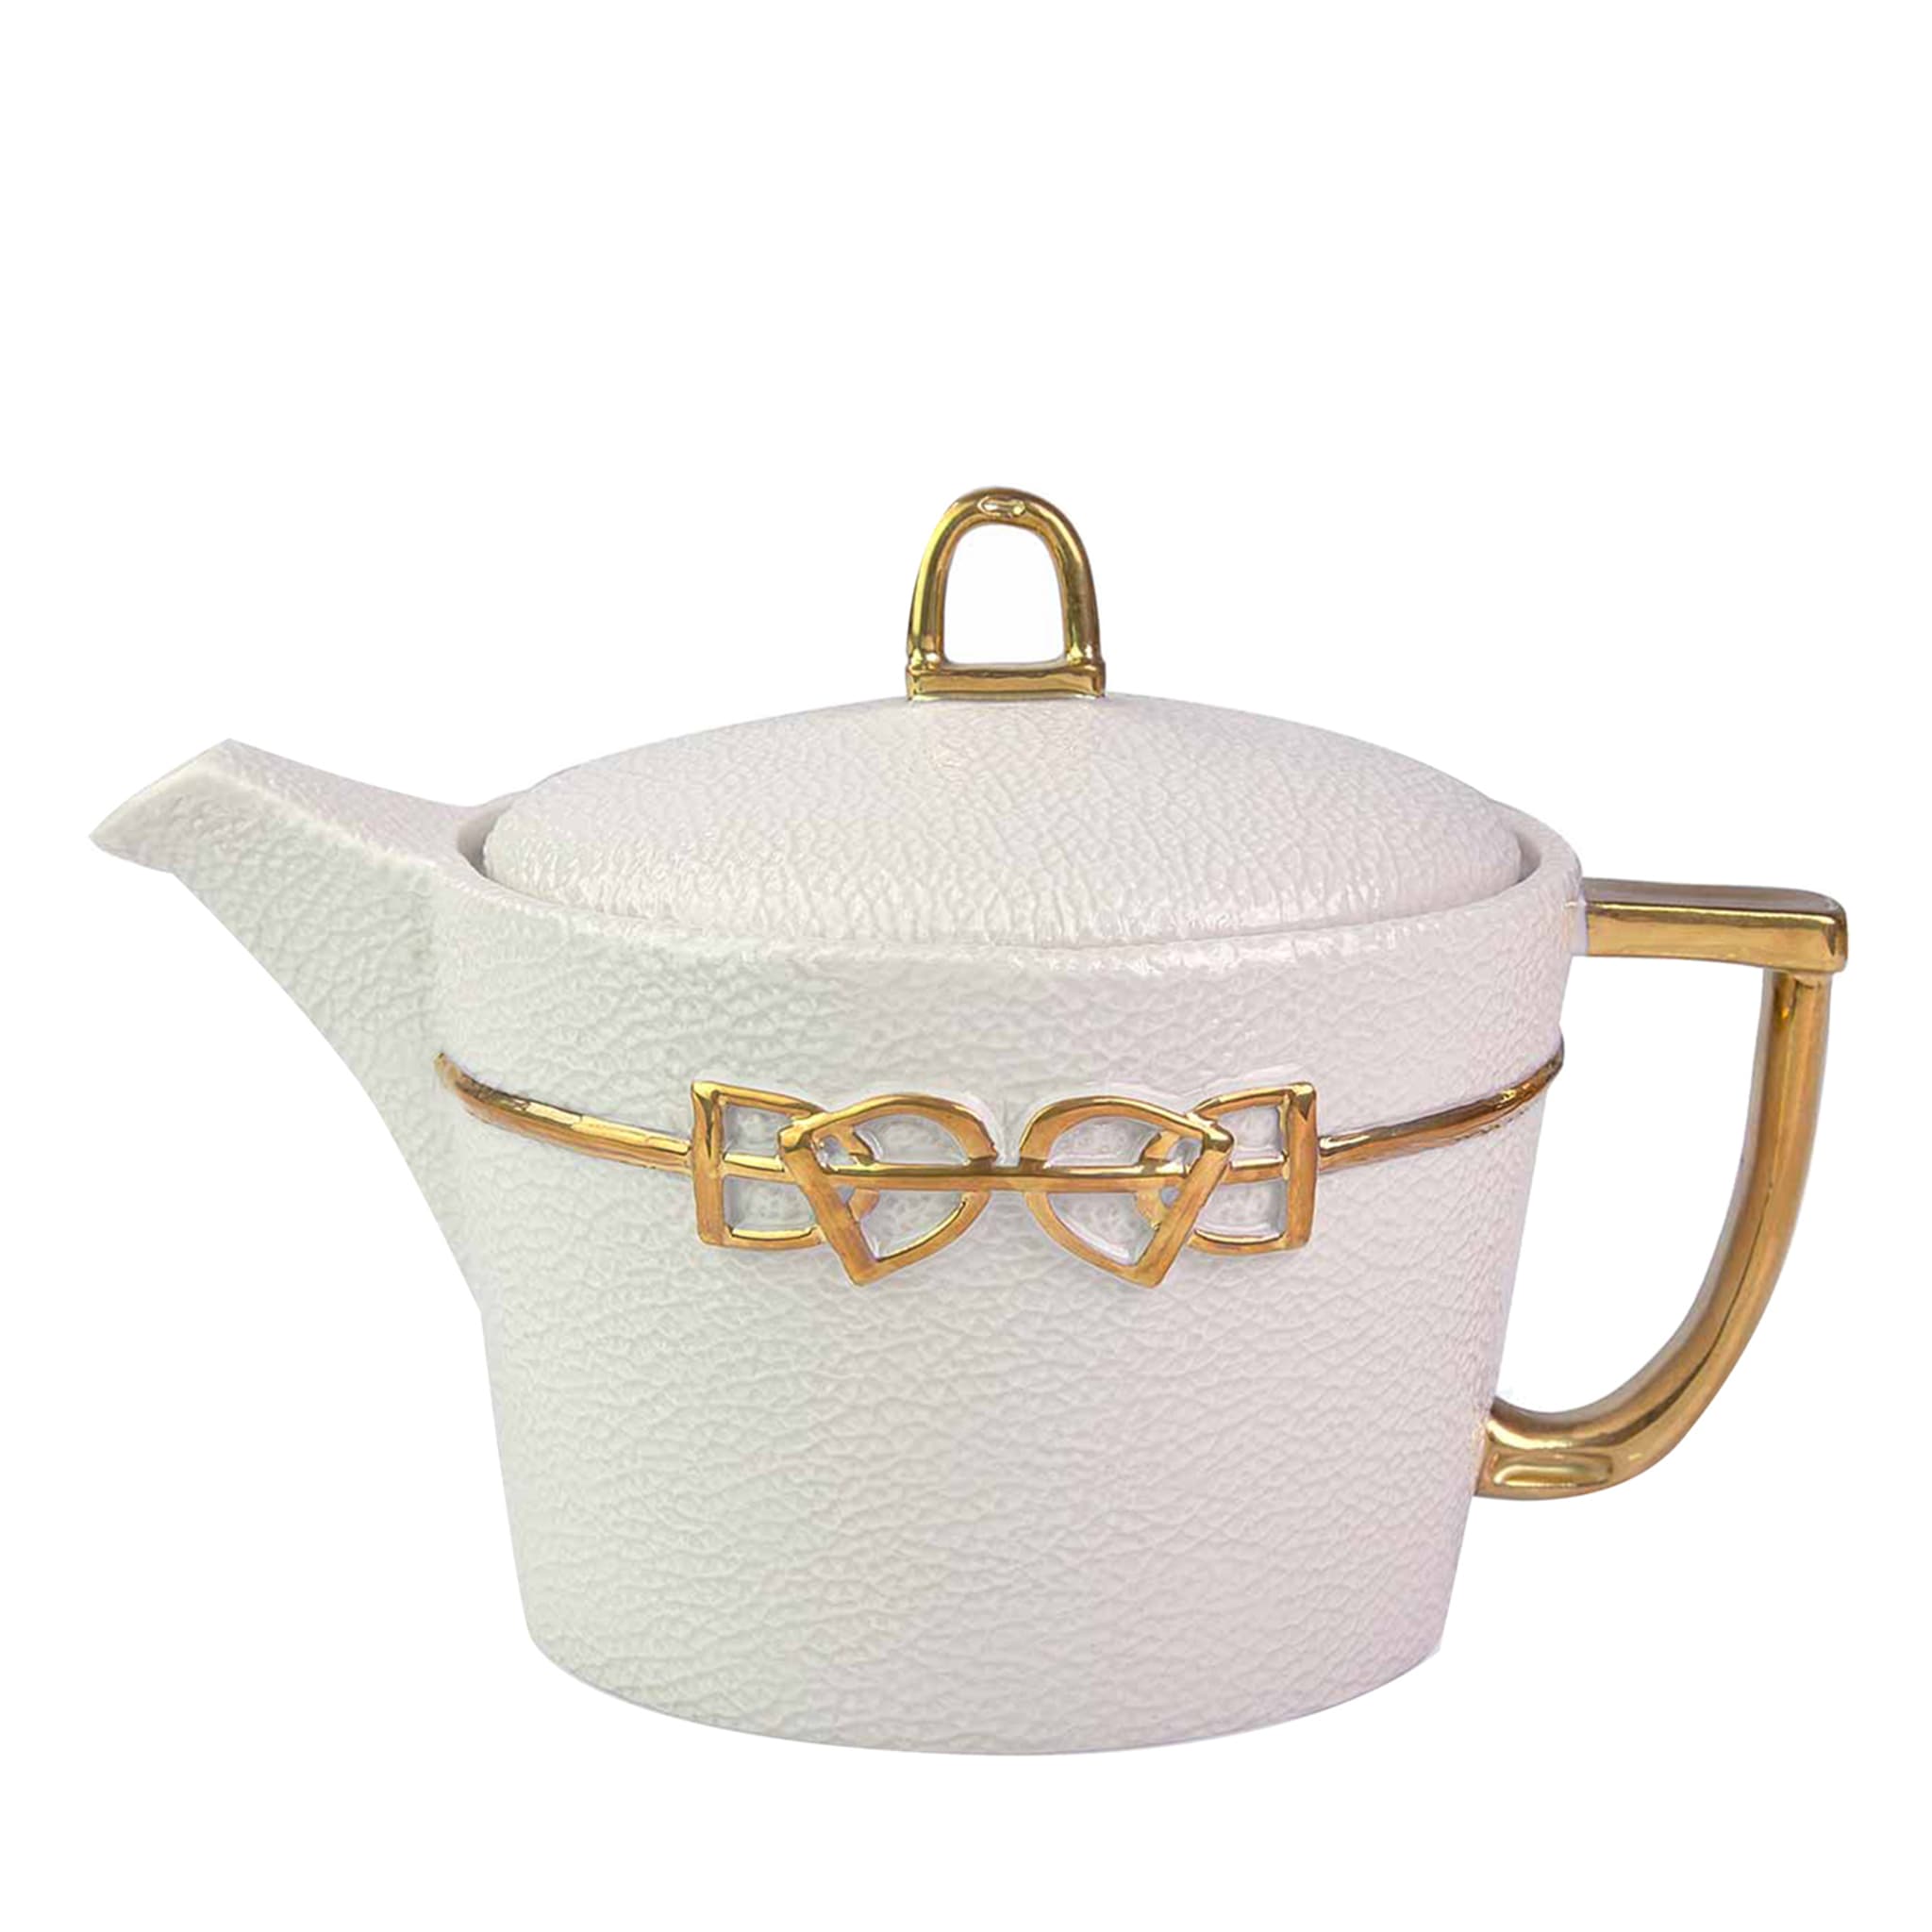 DRESSAGE TEA POT - WHITE AND GOLD - Main view